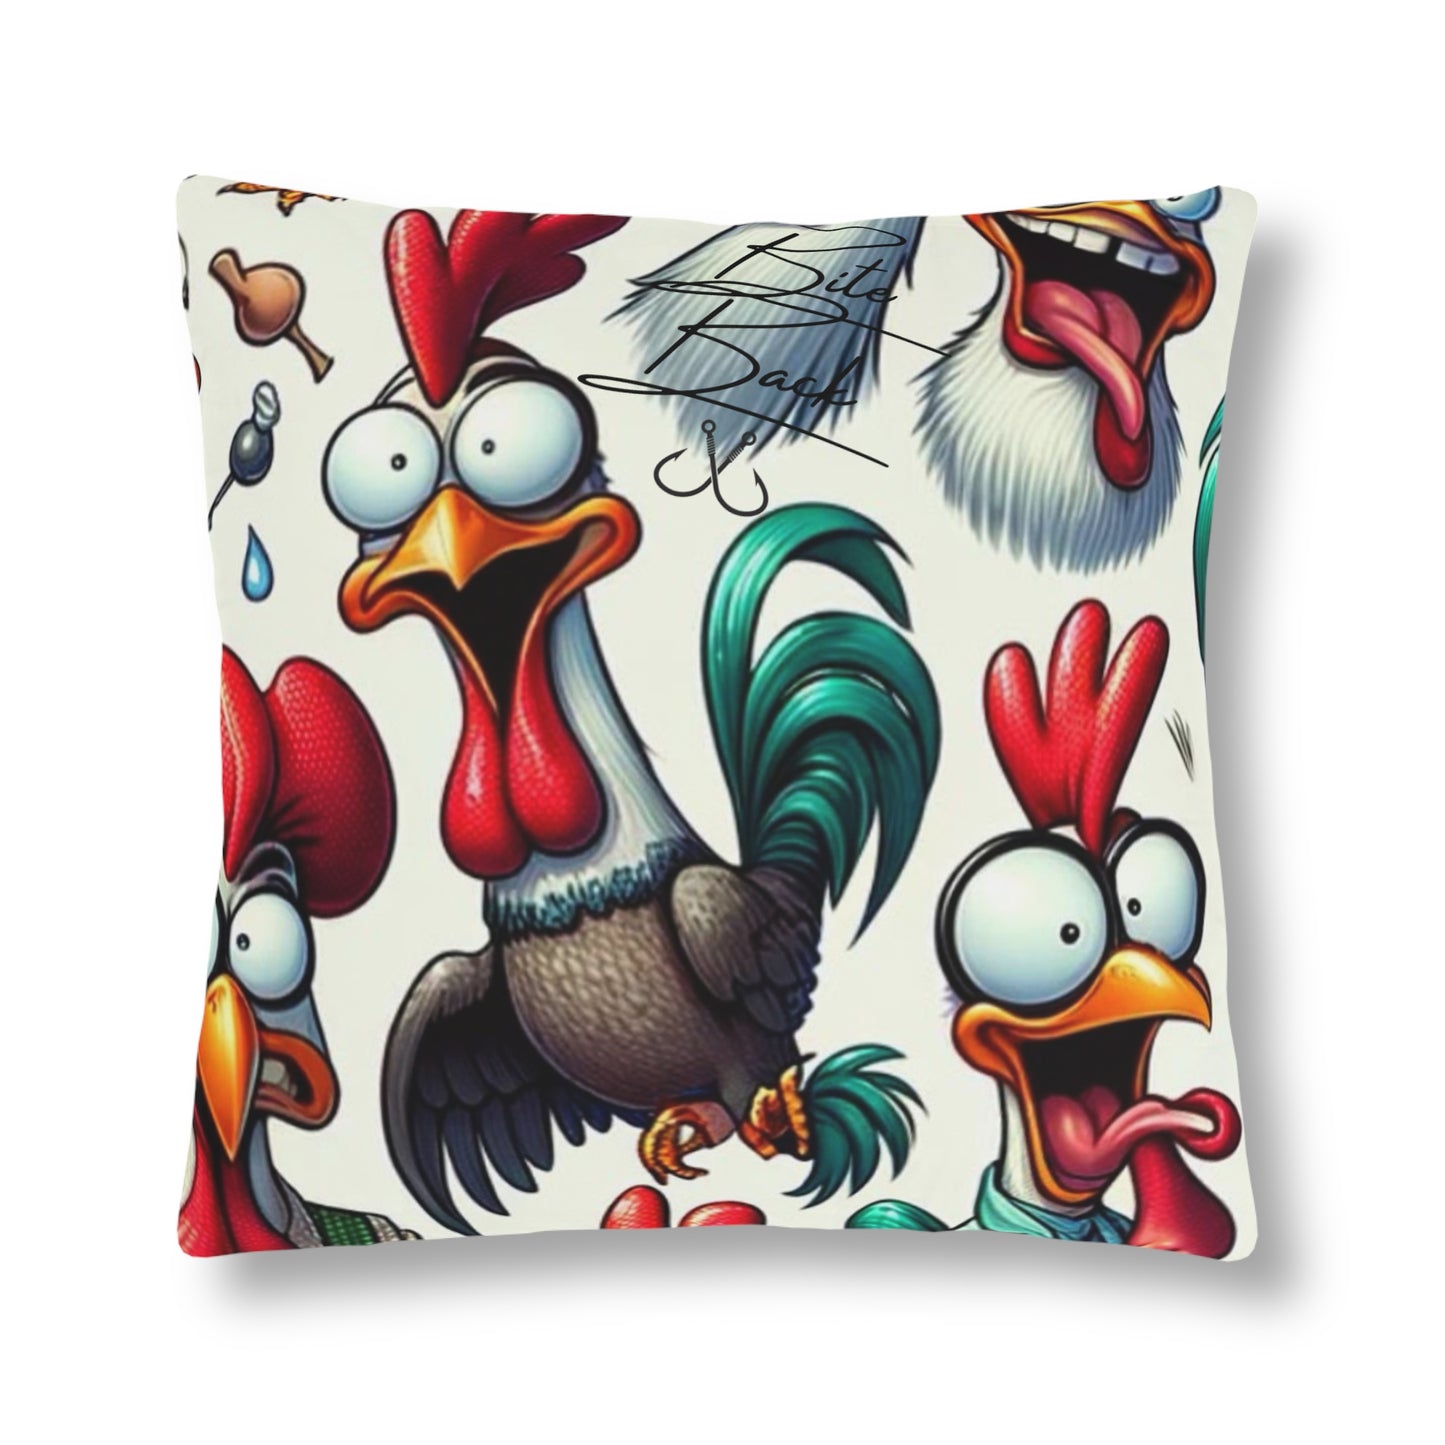 Crazy Roosters Waterproof Pillows